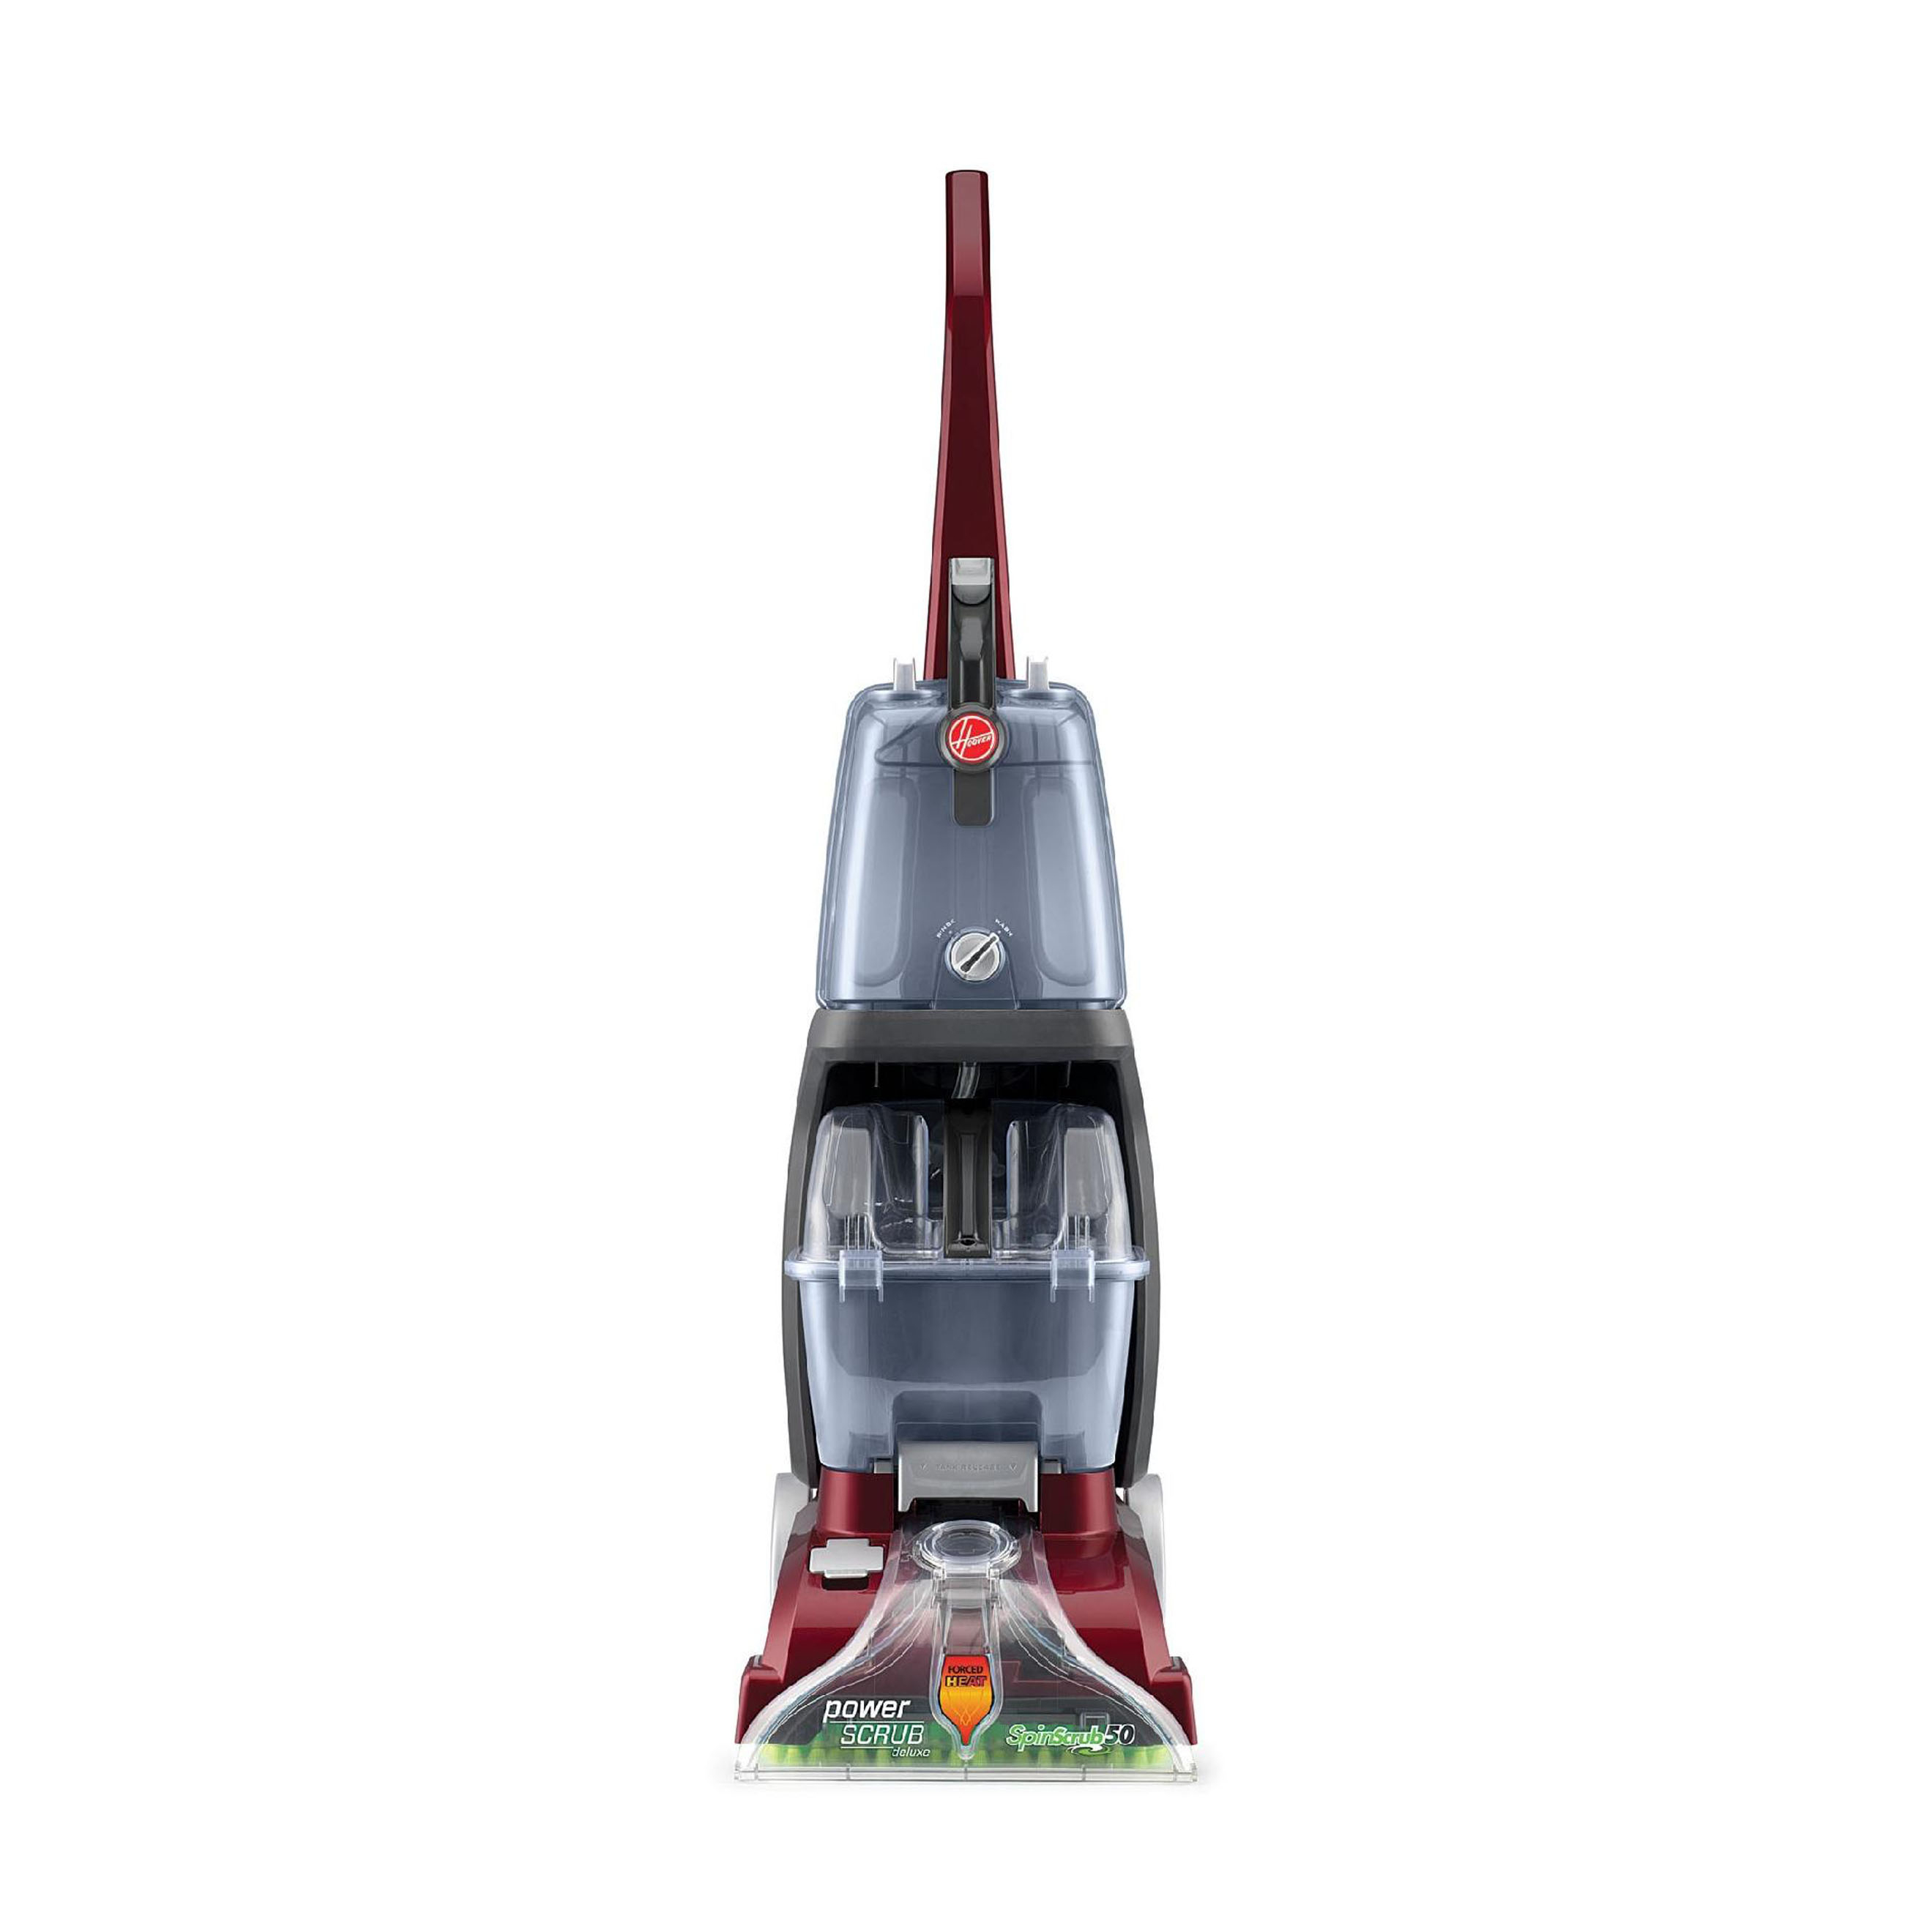 Official Hoover Fh50150 Carpet Cleaner